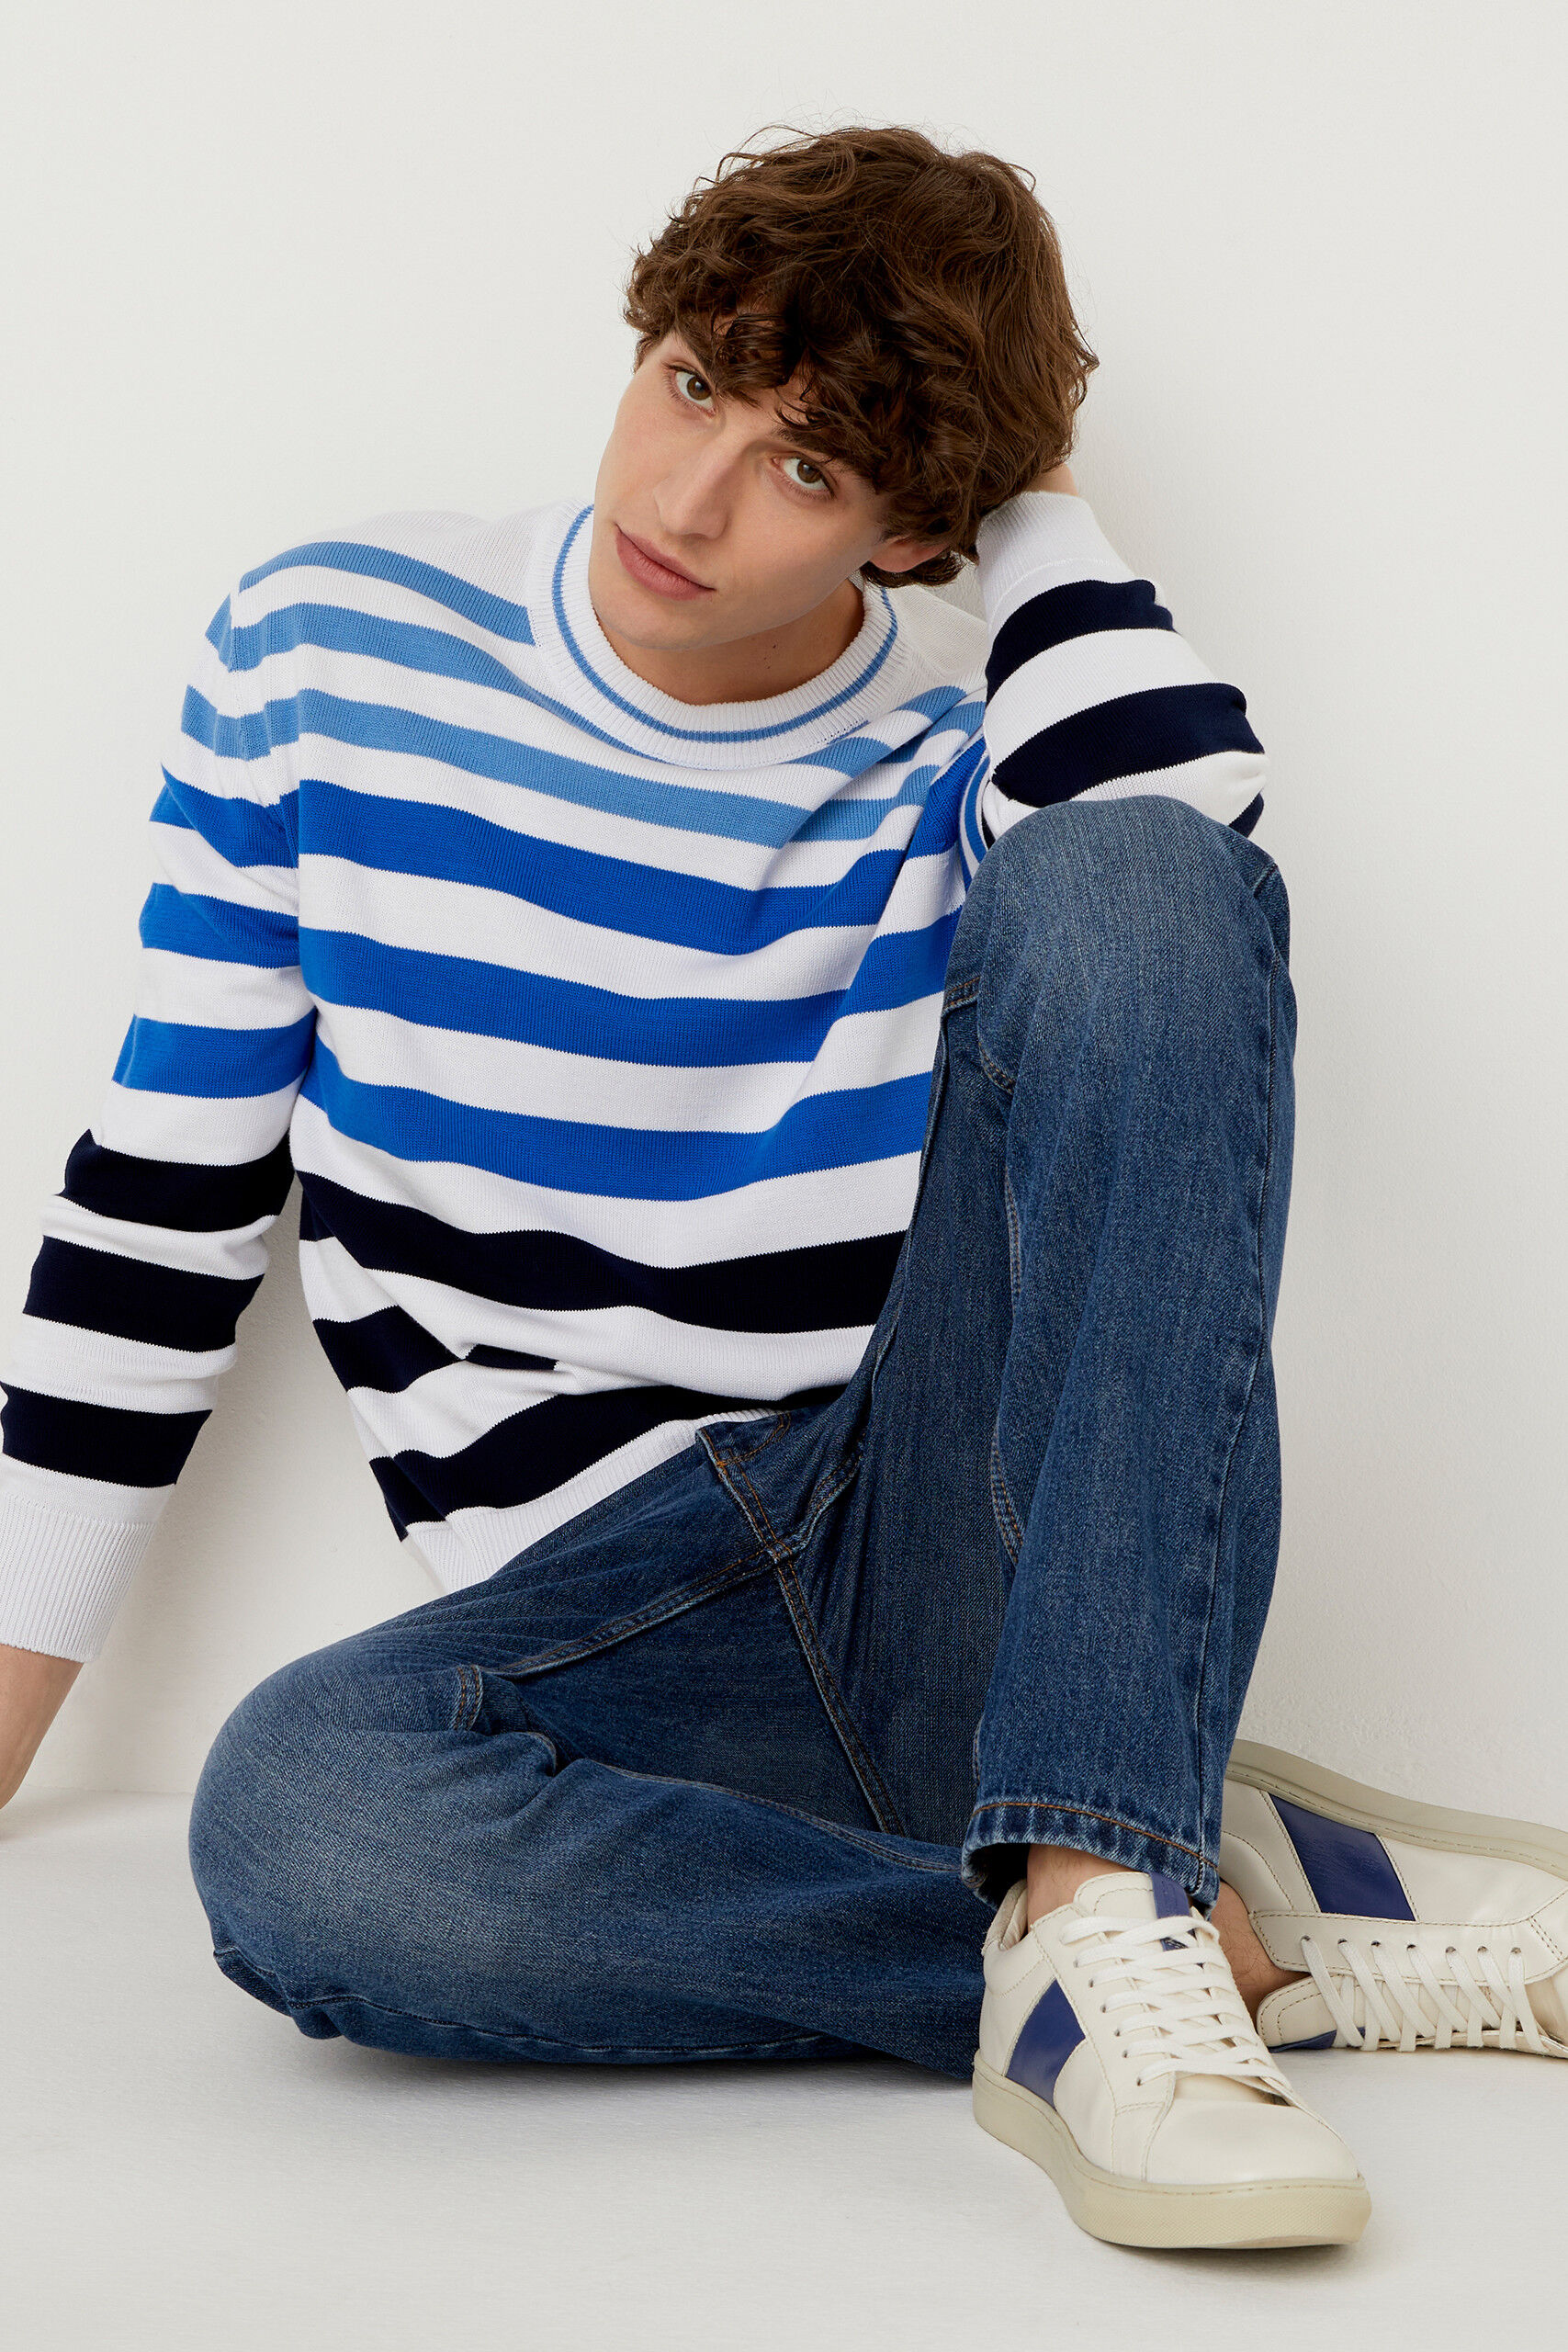 Men's Knitwear and Jumpers New Collection 2022 | Benetton